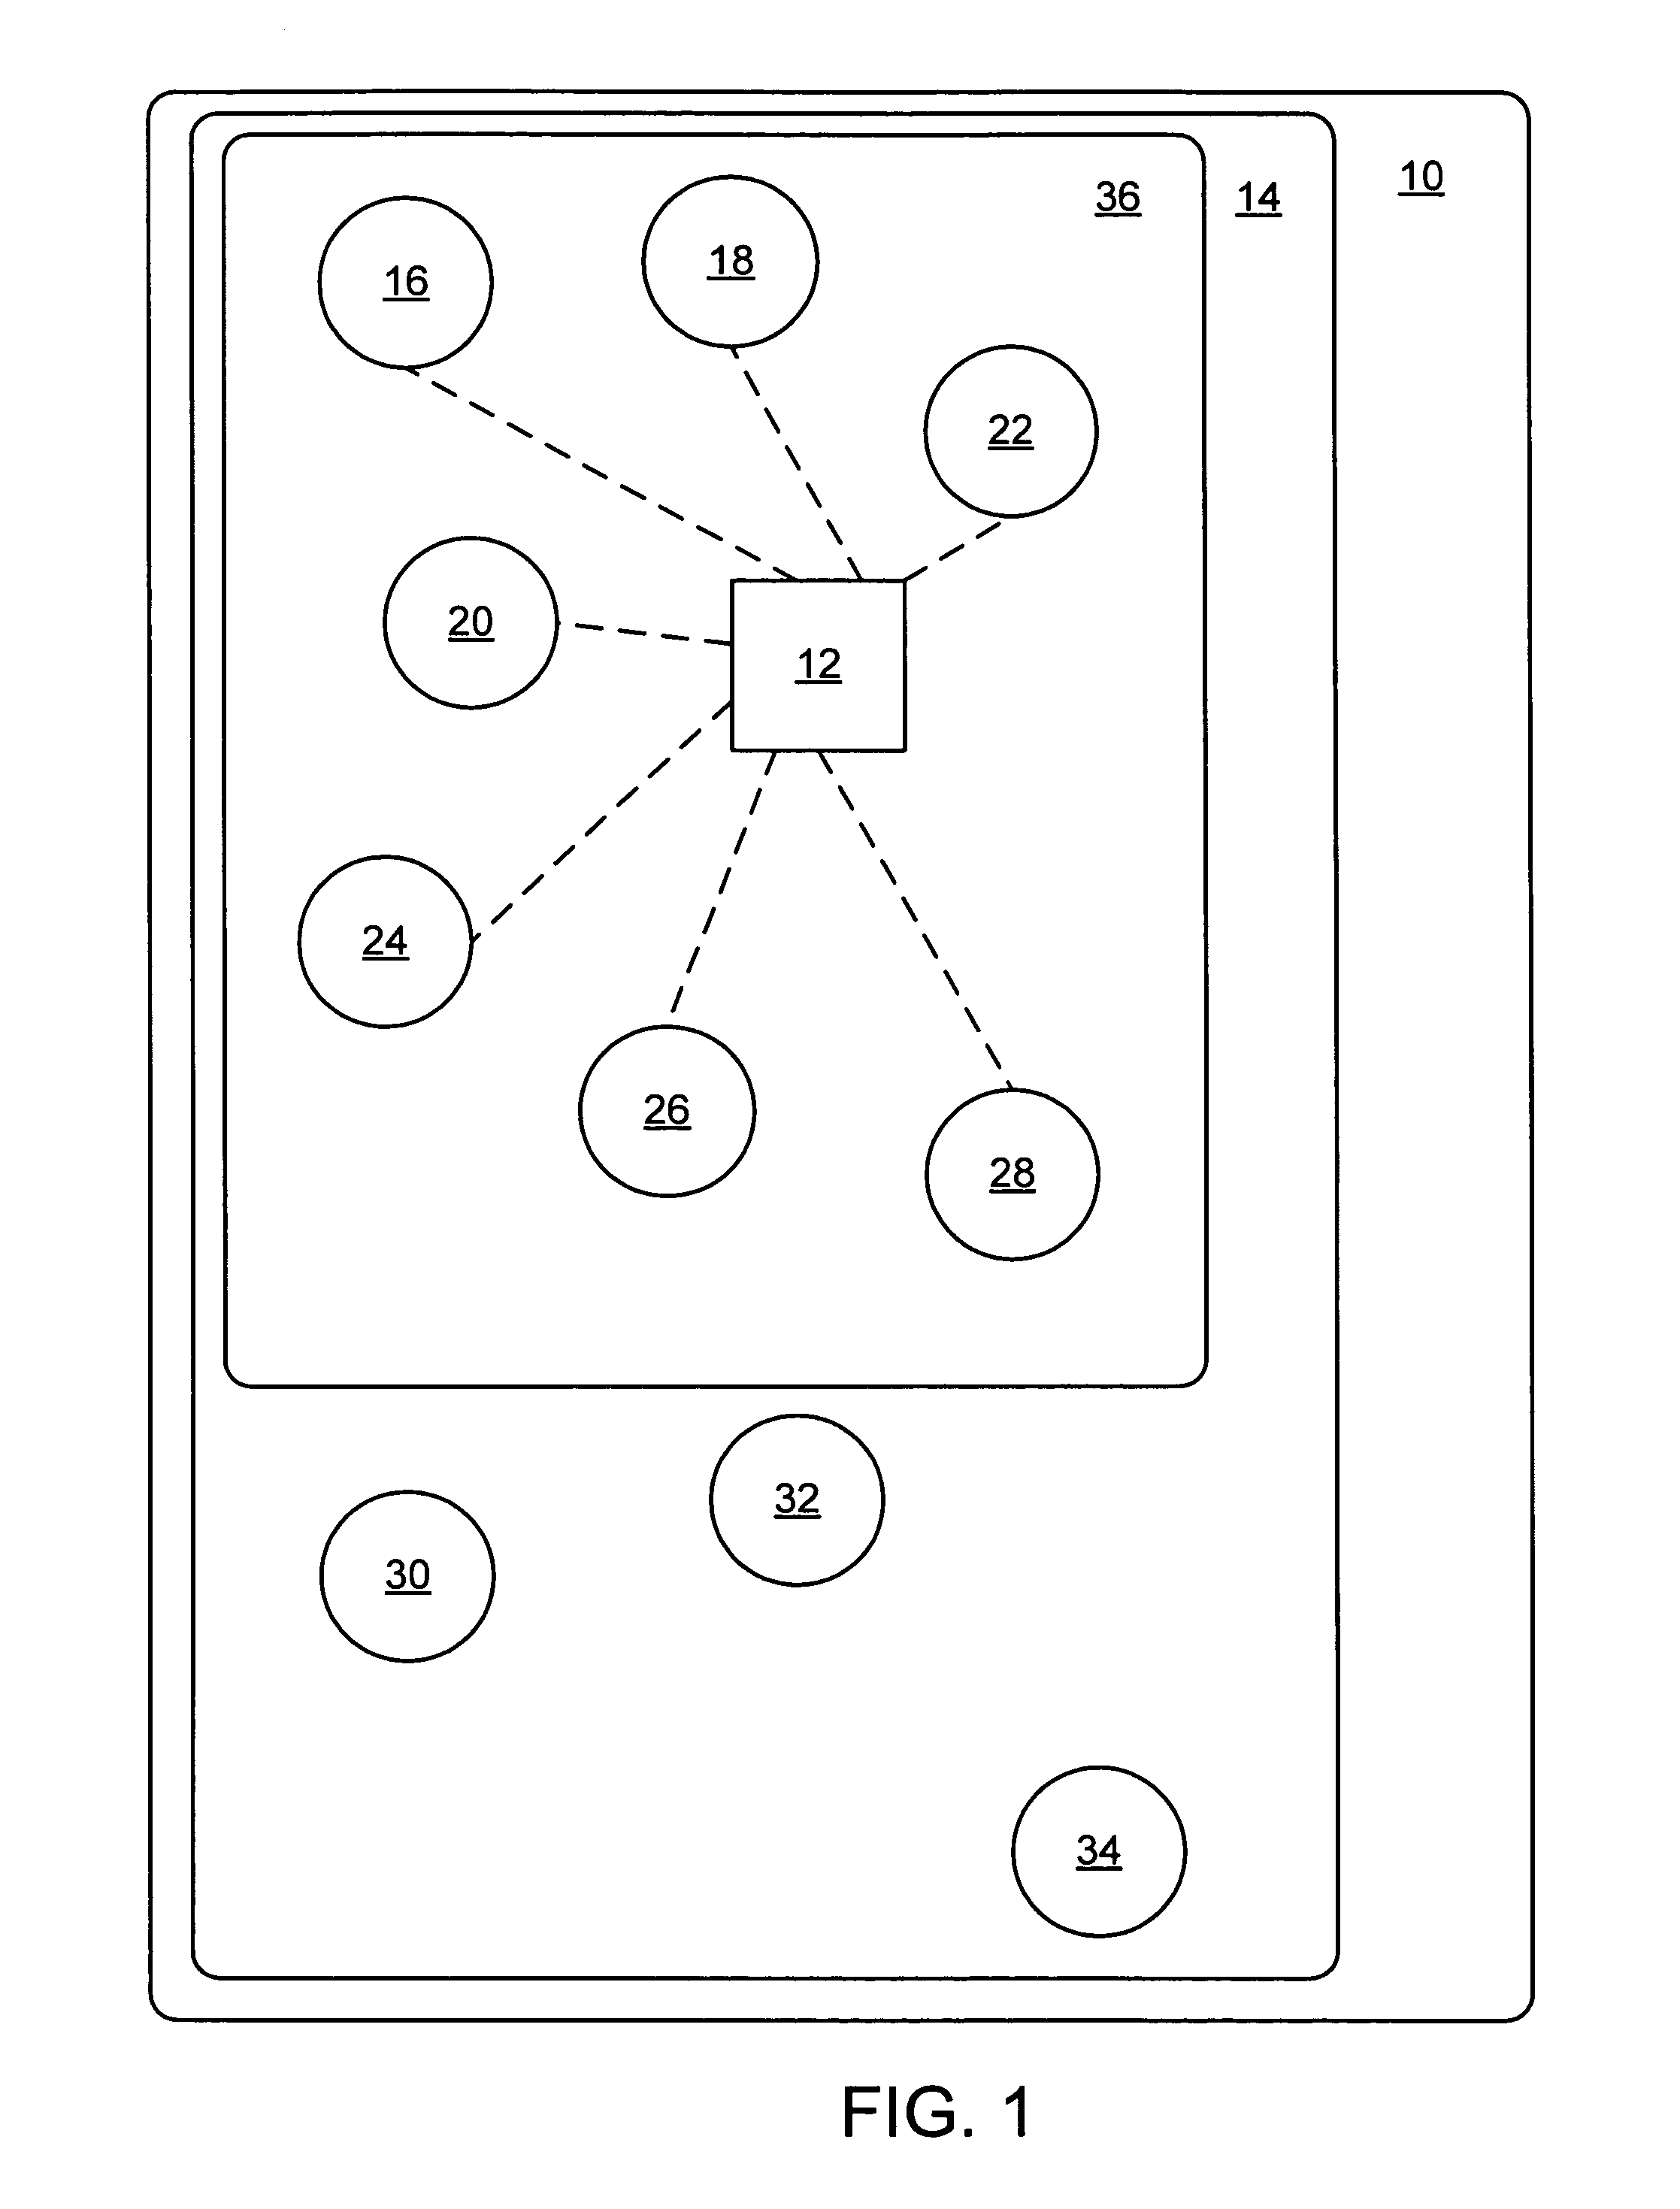 System and method for provisioning a wireless device to only be able to access network services within a specific location